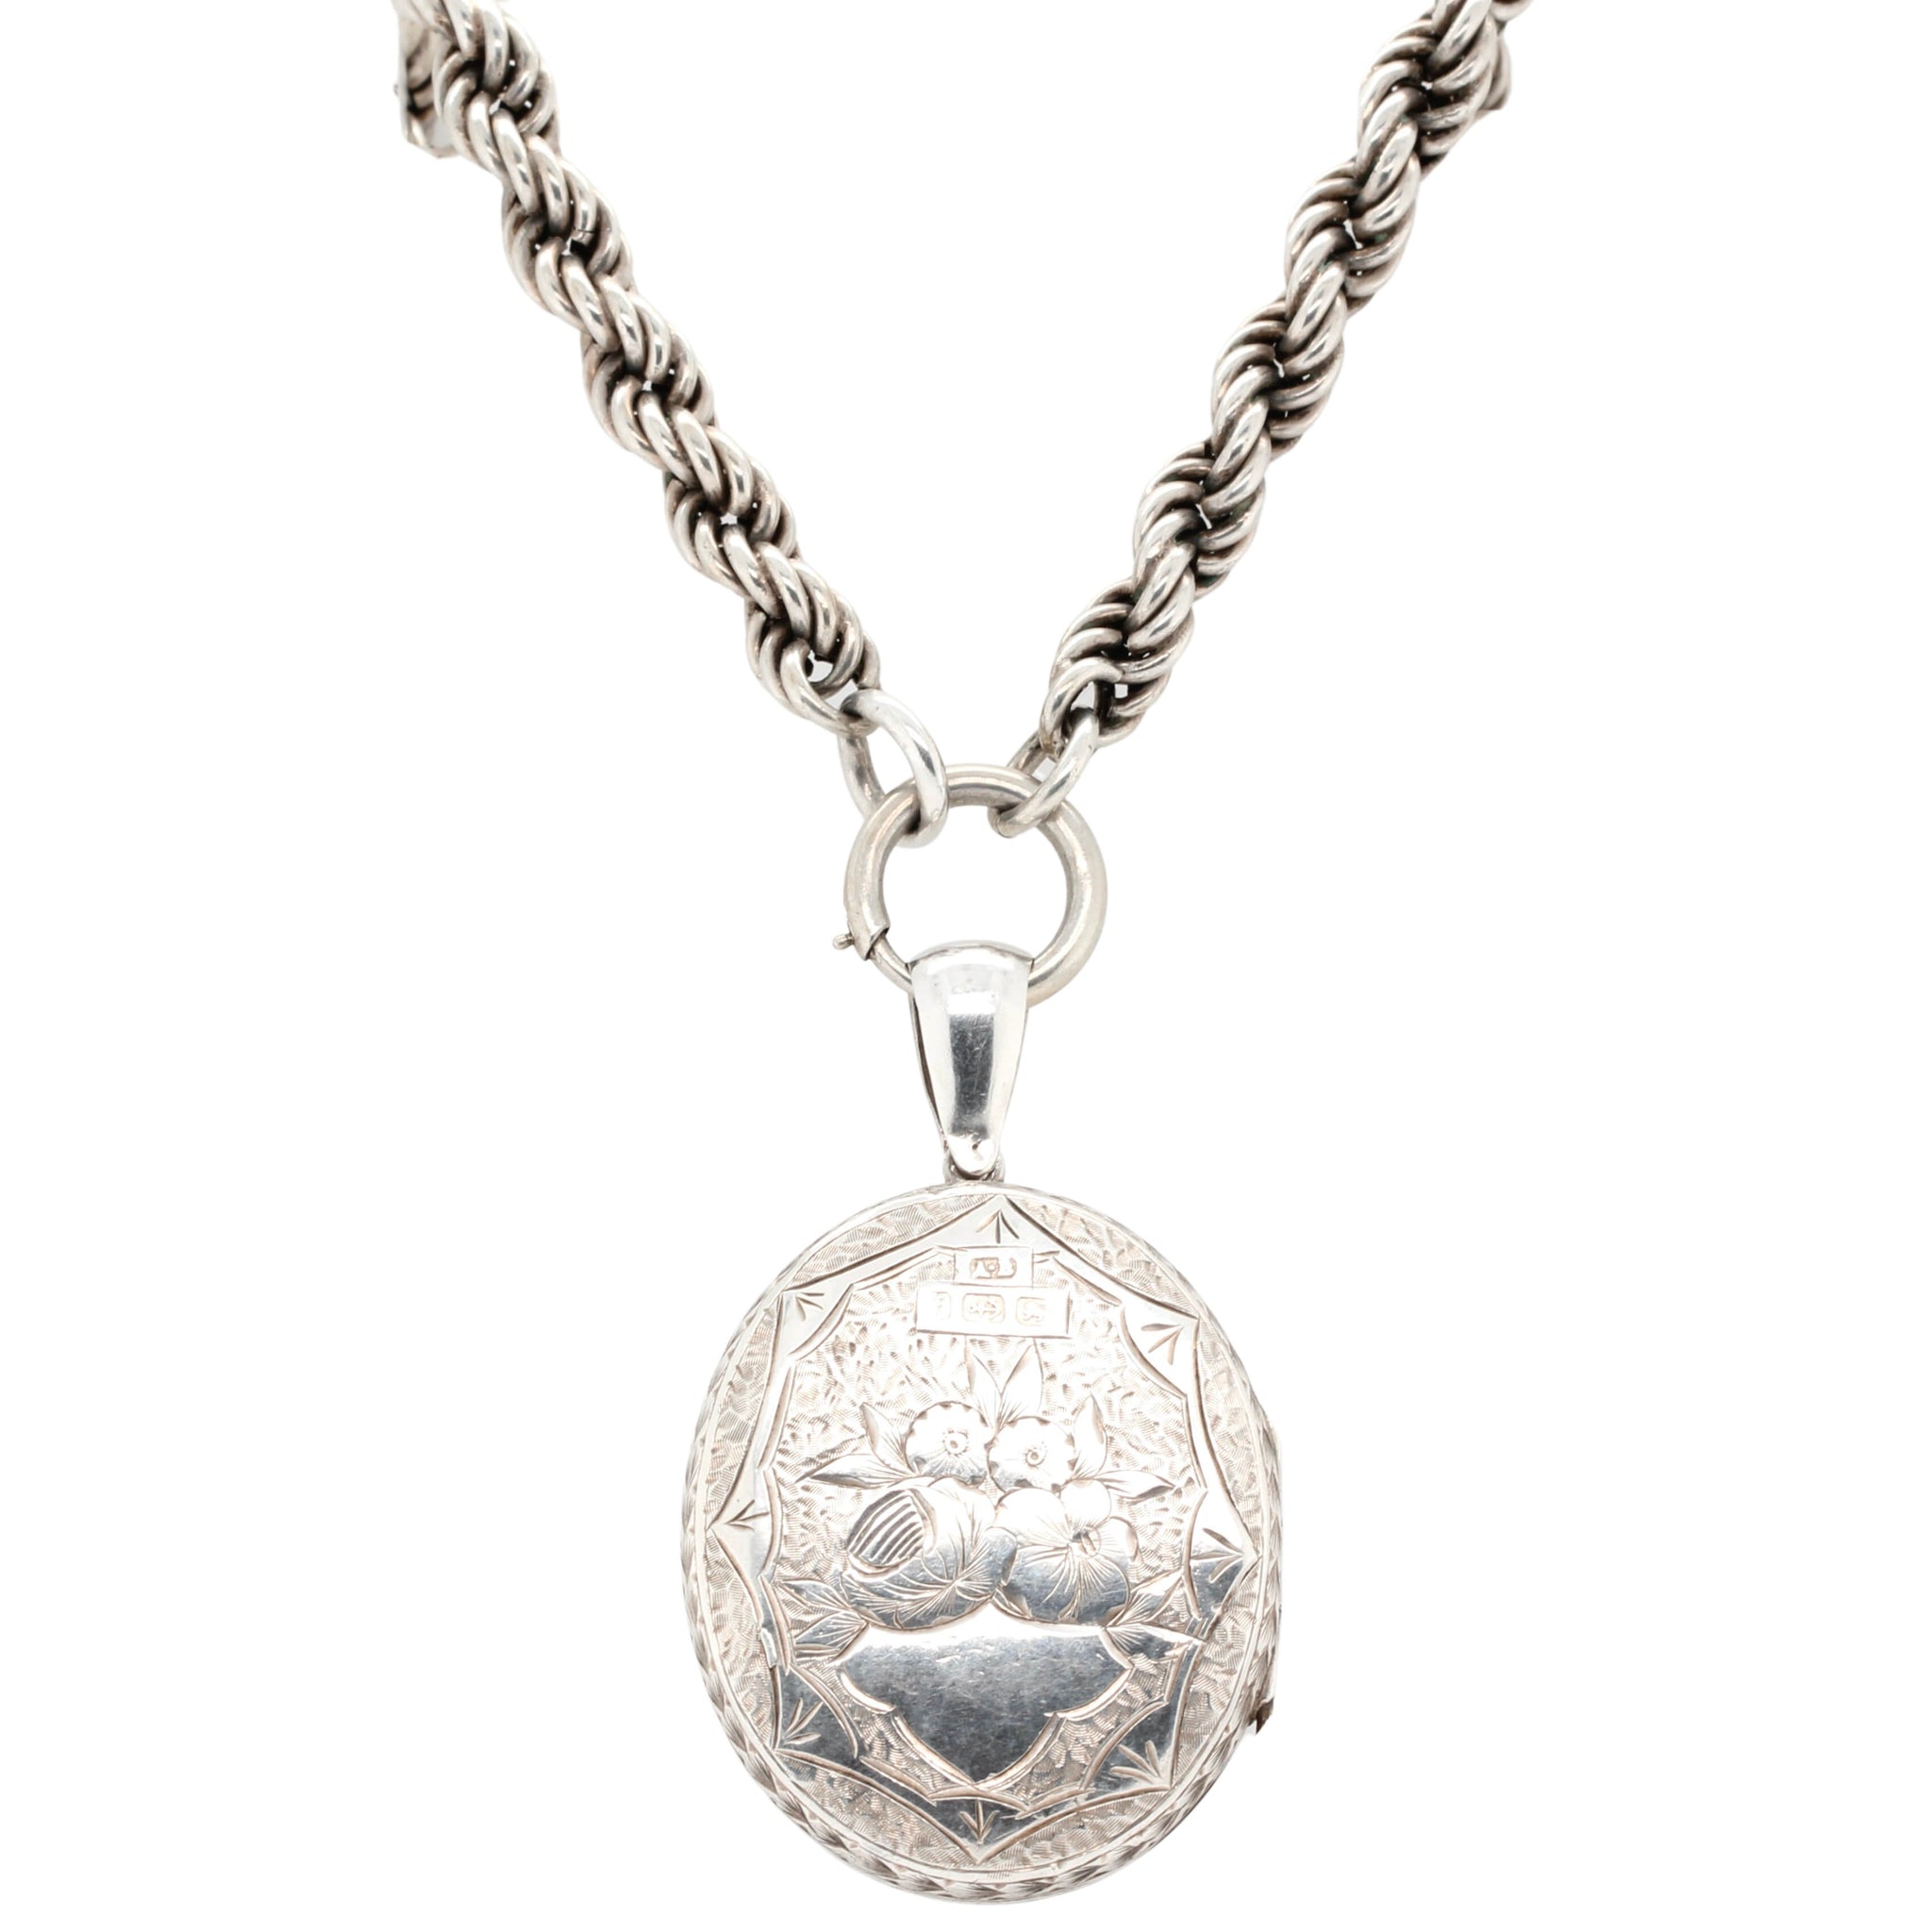 Victorian Silver Locket and Chain